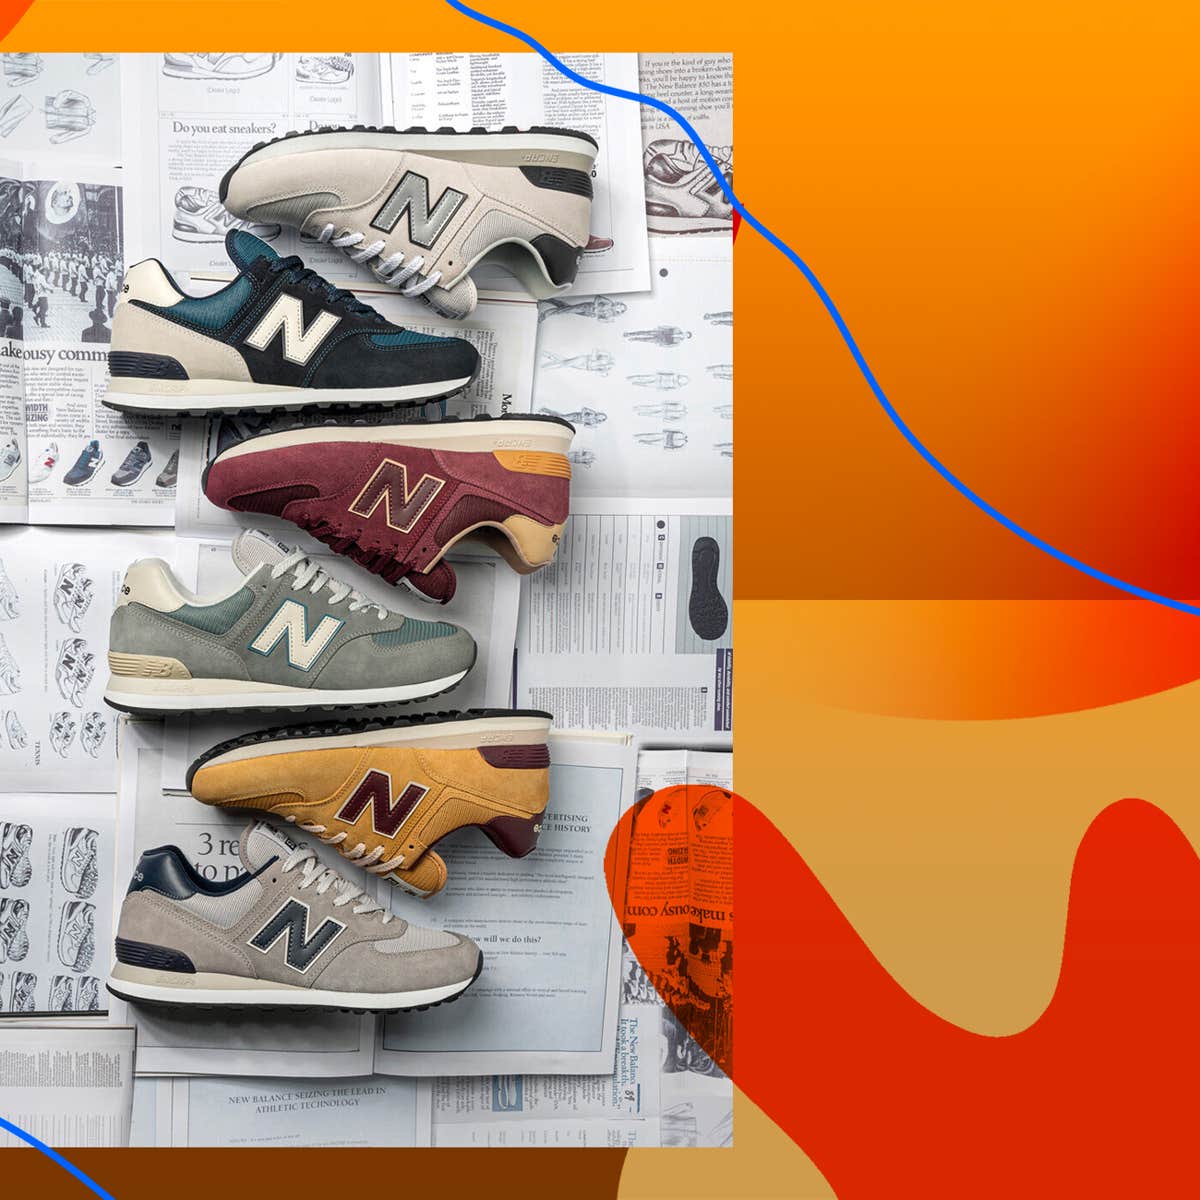 Onveilig Symmetrie Strippen The Best New Balance Sneakers According To User Reviews